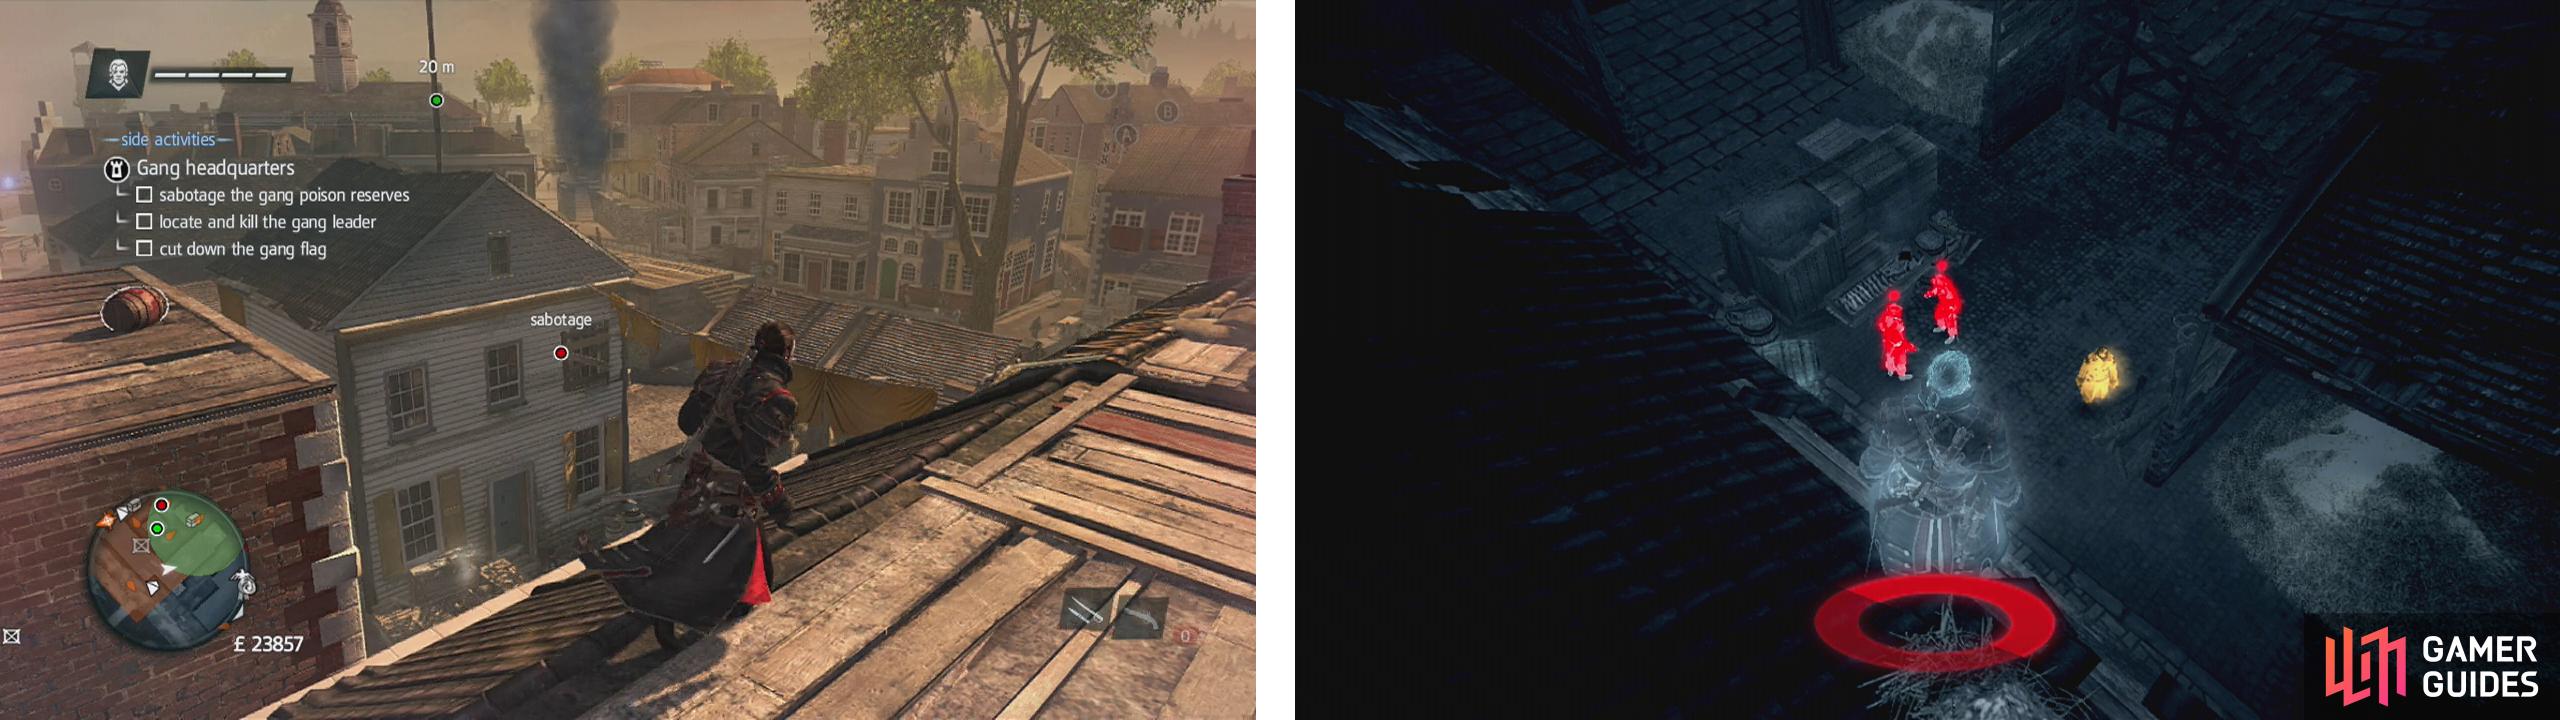 Knock out the snipers before approaching the building with the flag (left). From here look down to see the barrel we need to destroy and the captain (right).